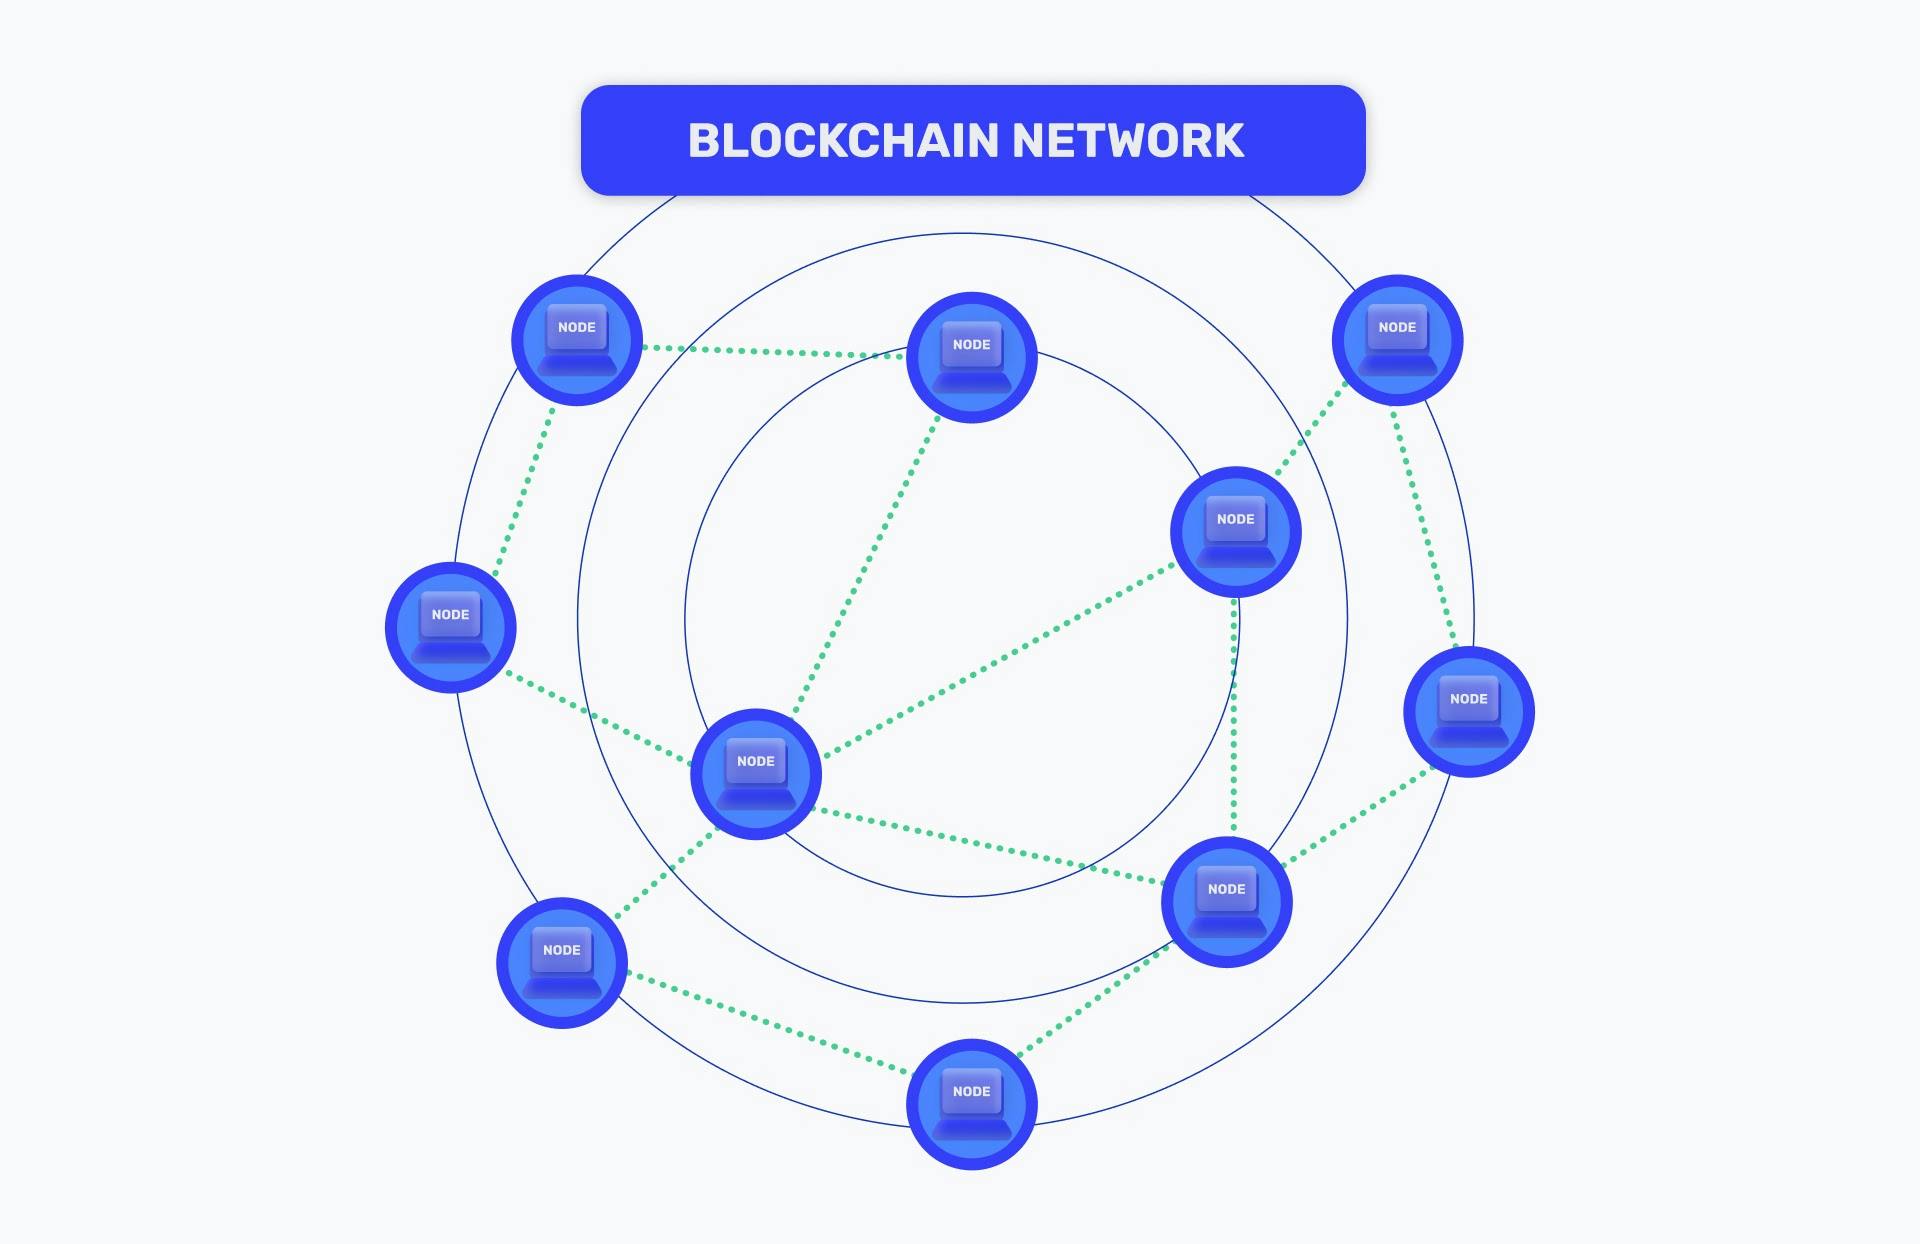 The “blockchain” is just a collection of computers (nodes) run by individuals, collectively taking part in verifying the state of this blockchain following a certain set of rules.